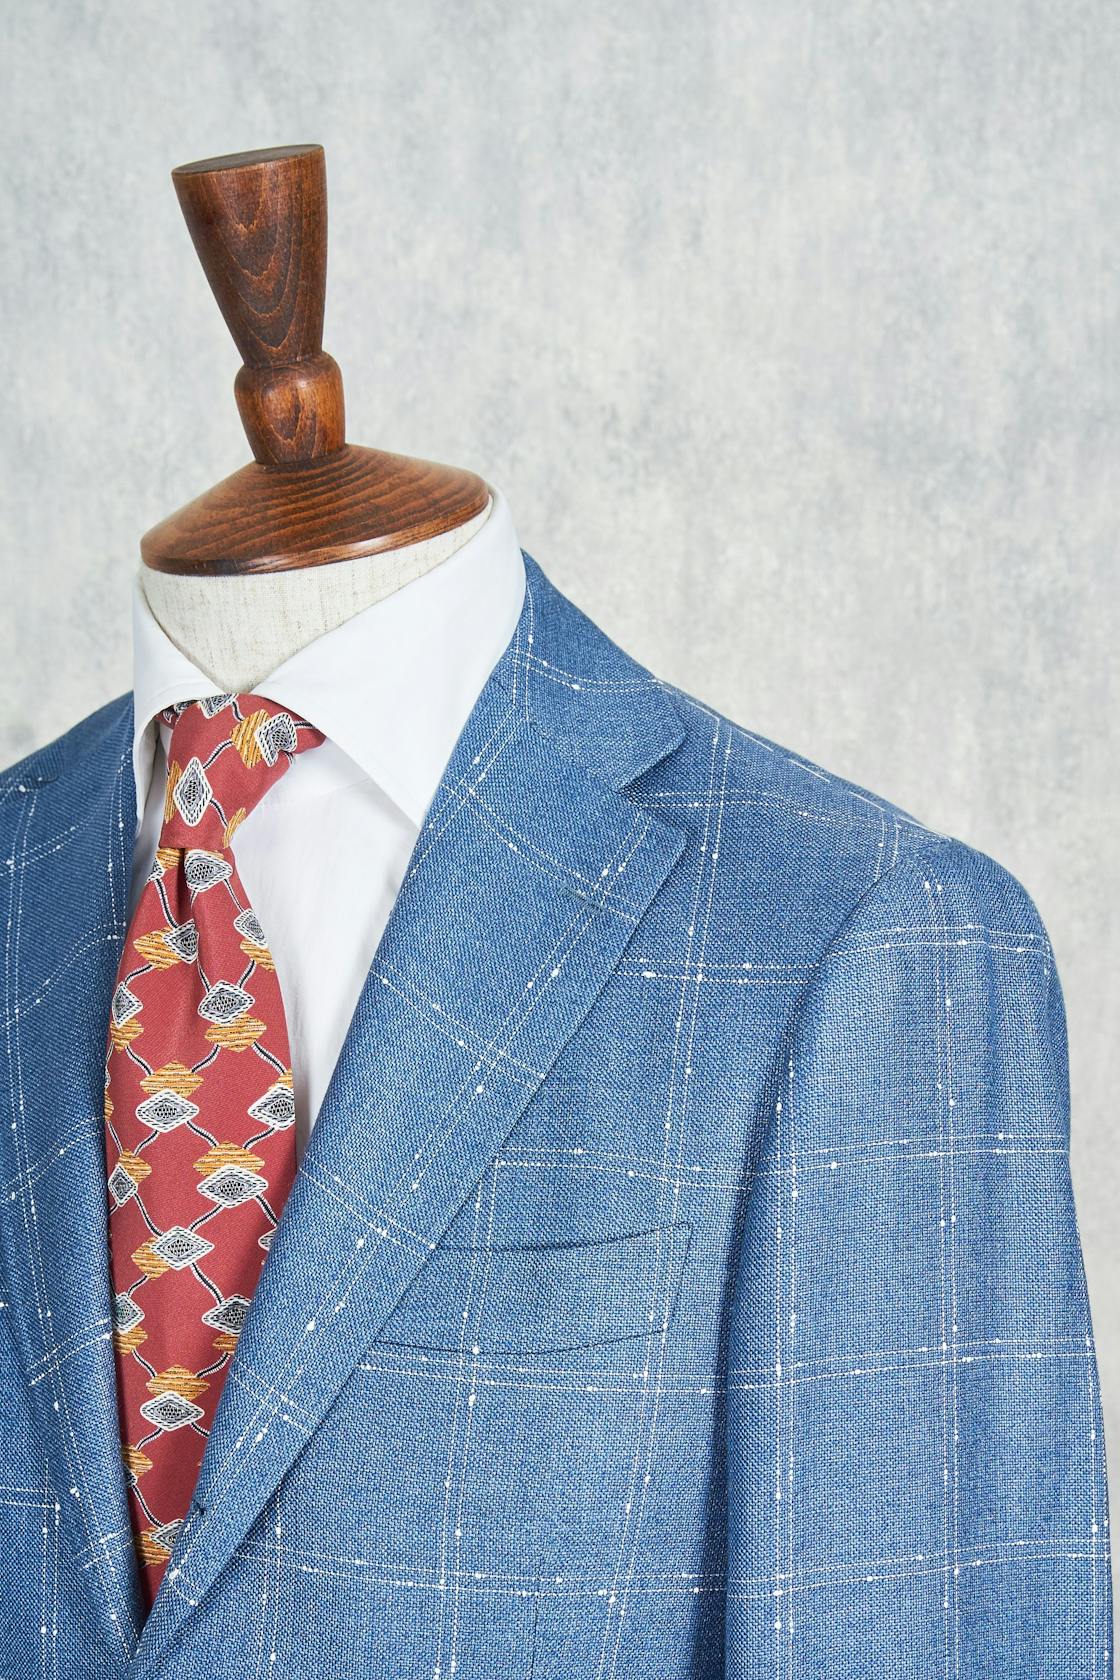 Ring Jacket 184 Light Blue with White Check Silk/Cotton Sport Coat